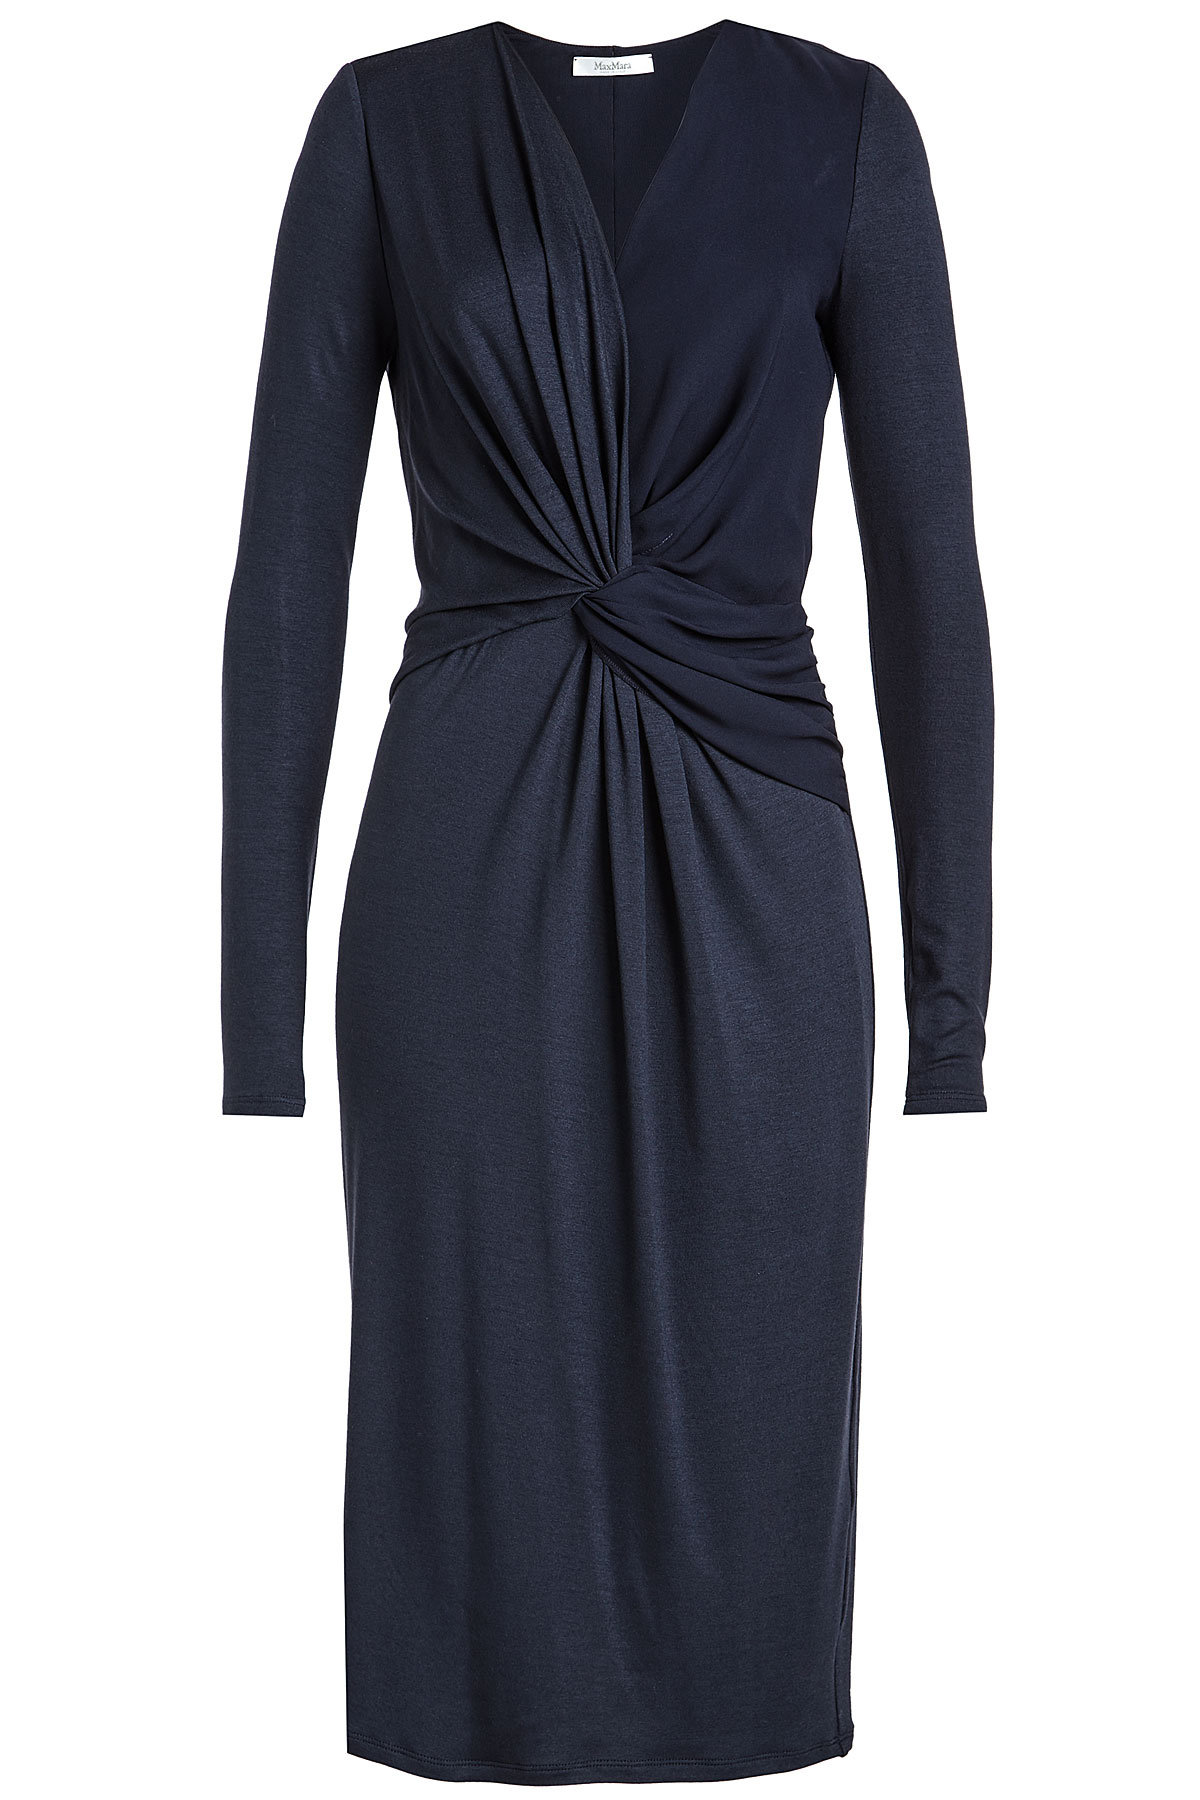 Max Mara - Knot Front Knit Dress with Wool